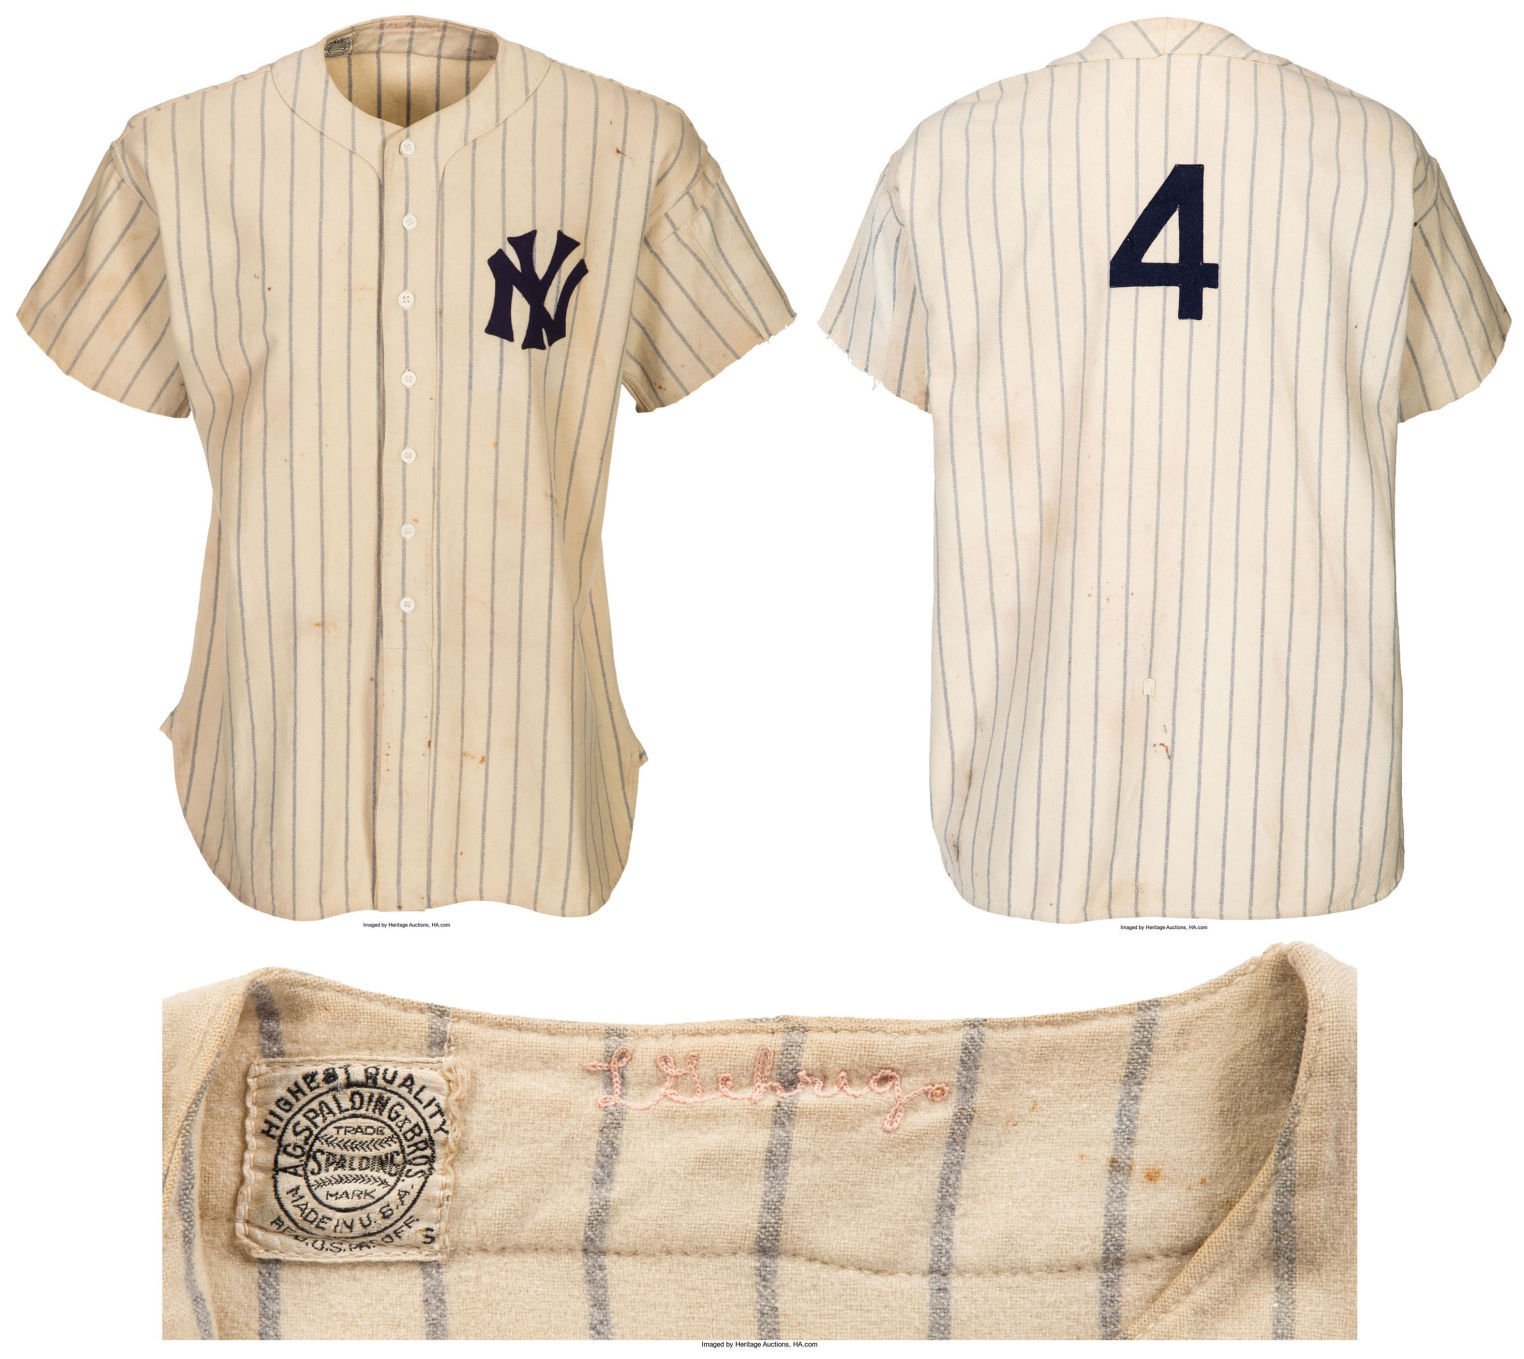 Game-worn Lou Gehrig jersey was the 